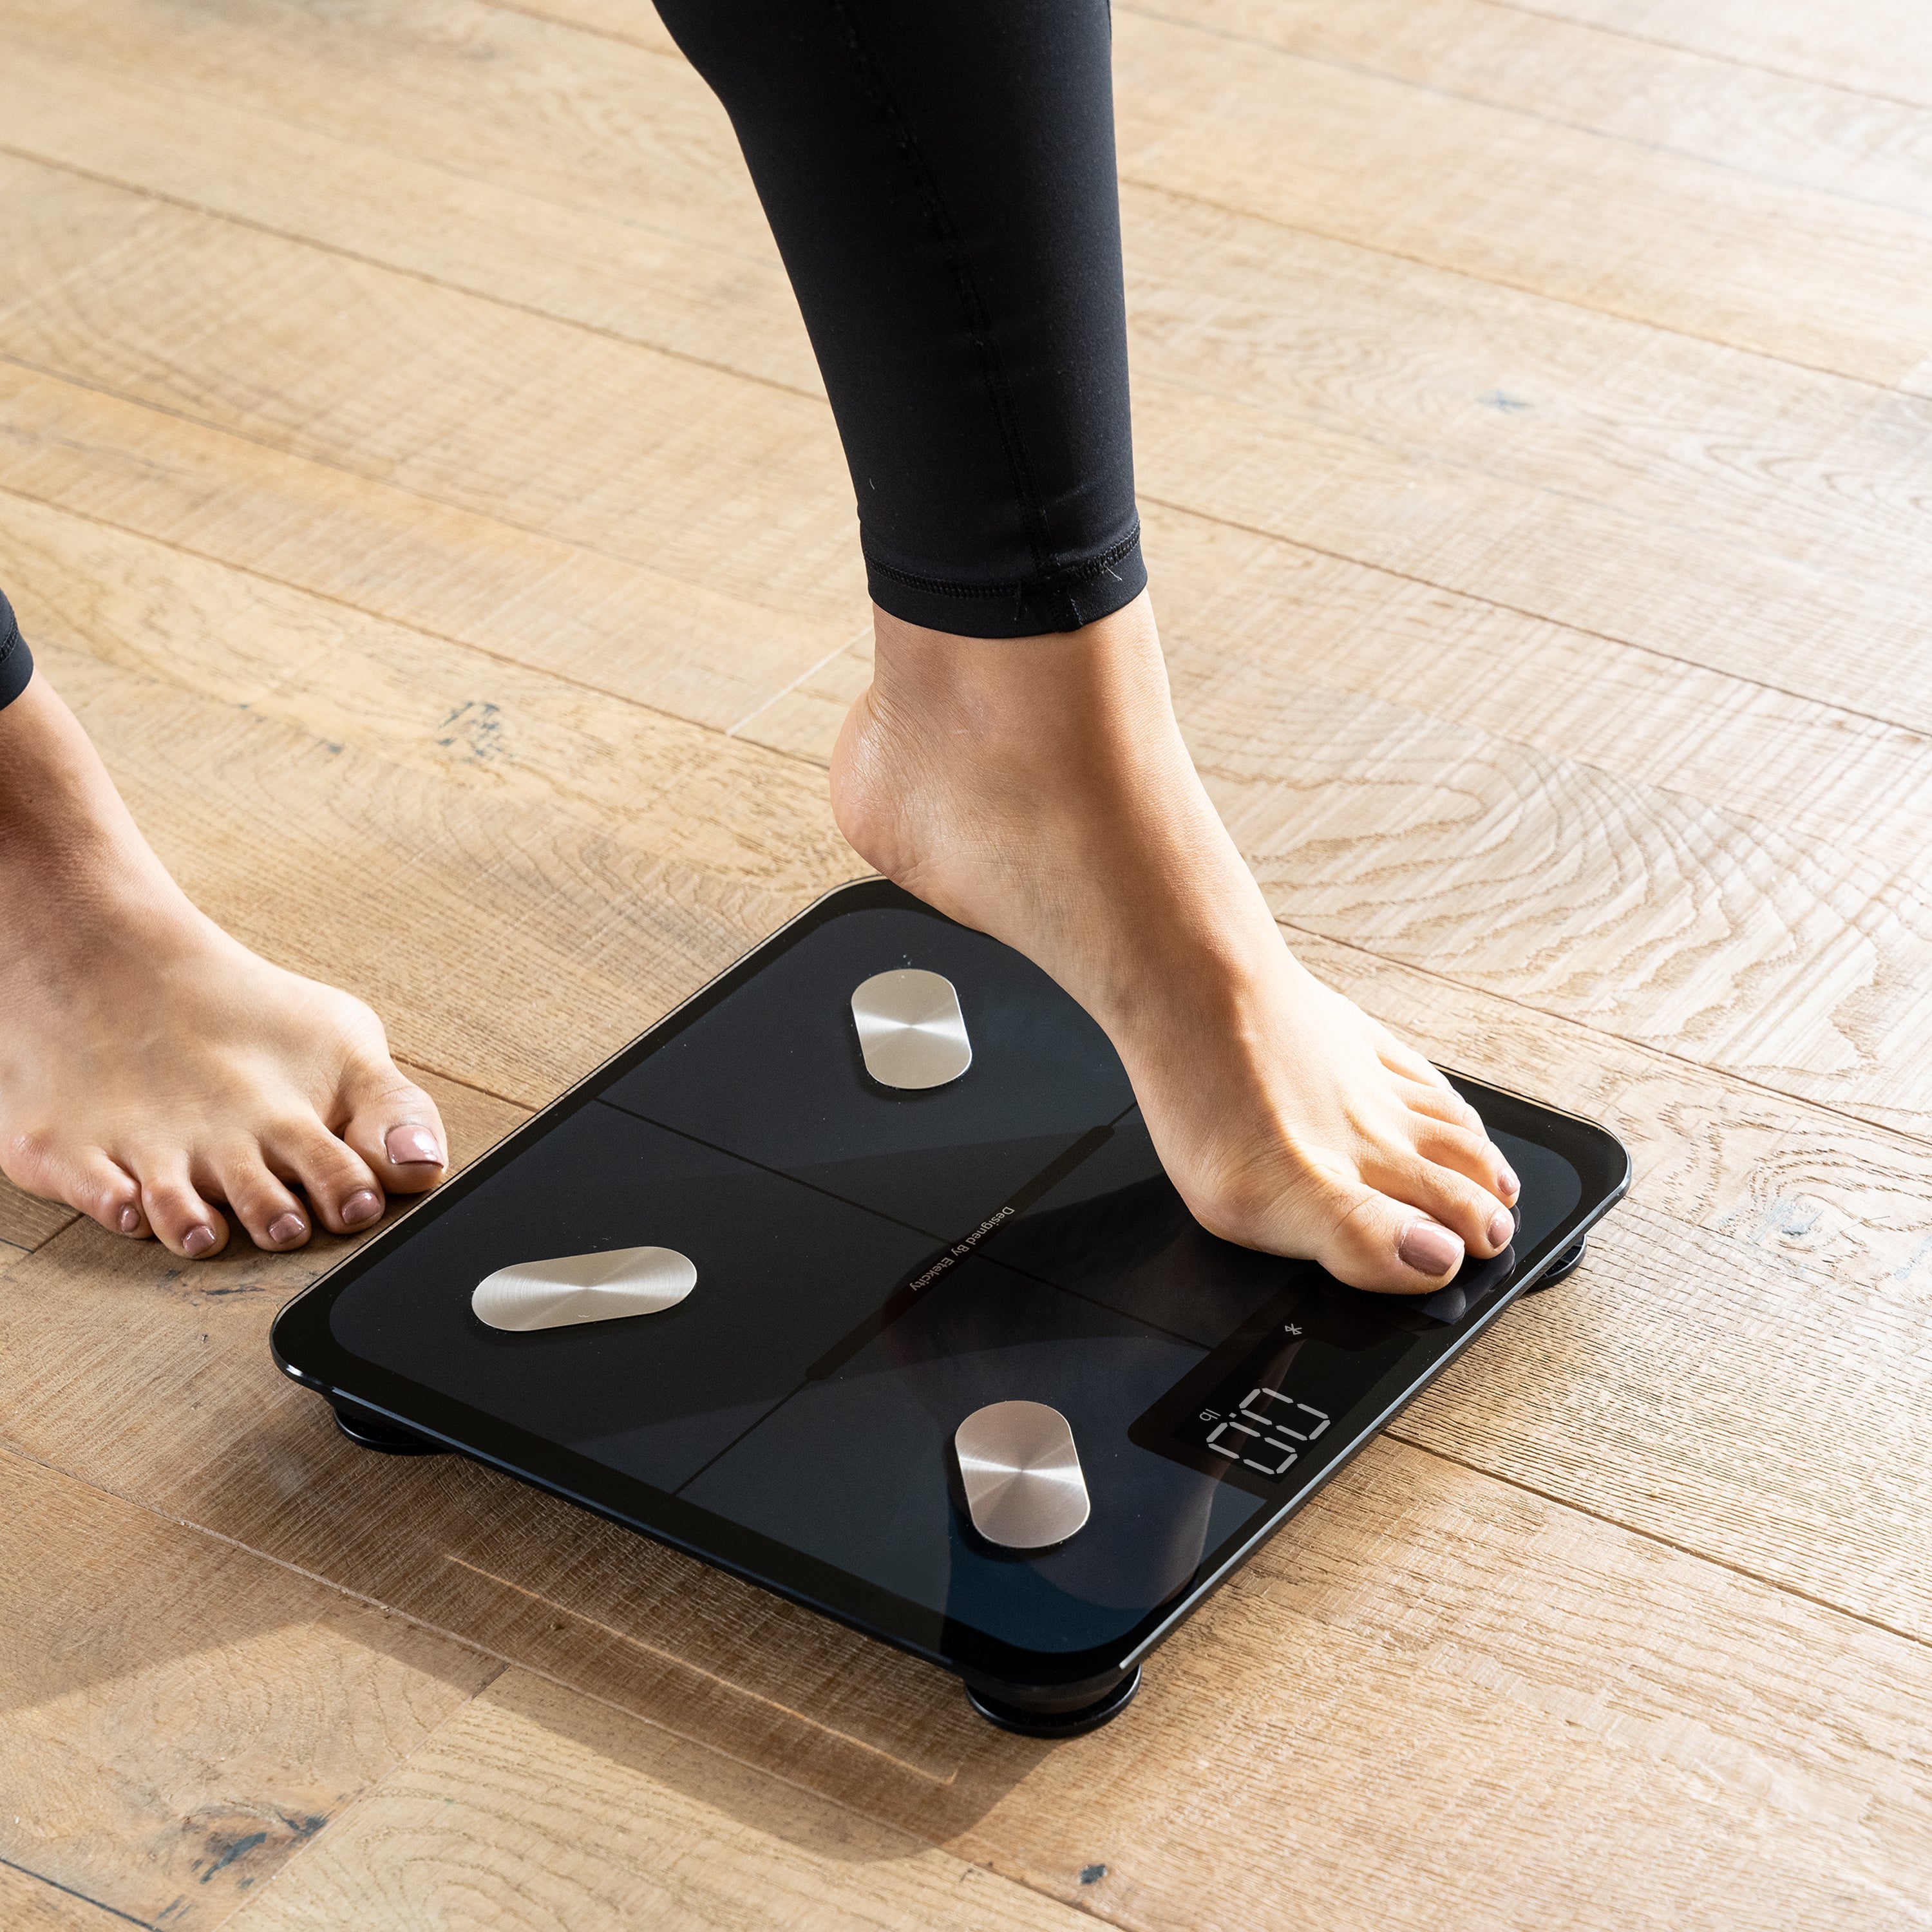 Jade Yoga Voyager Mat - Purple & Etekcity Scale for Body Weight